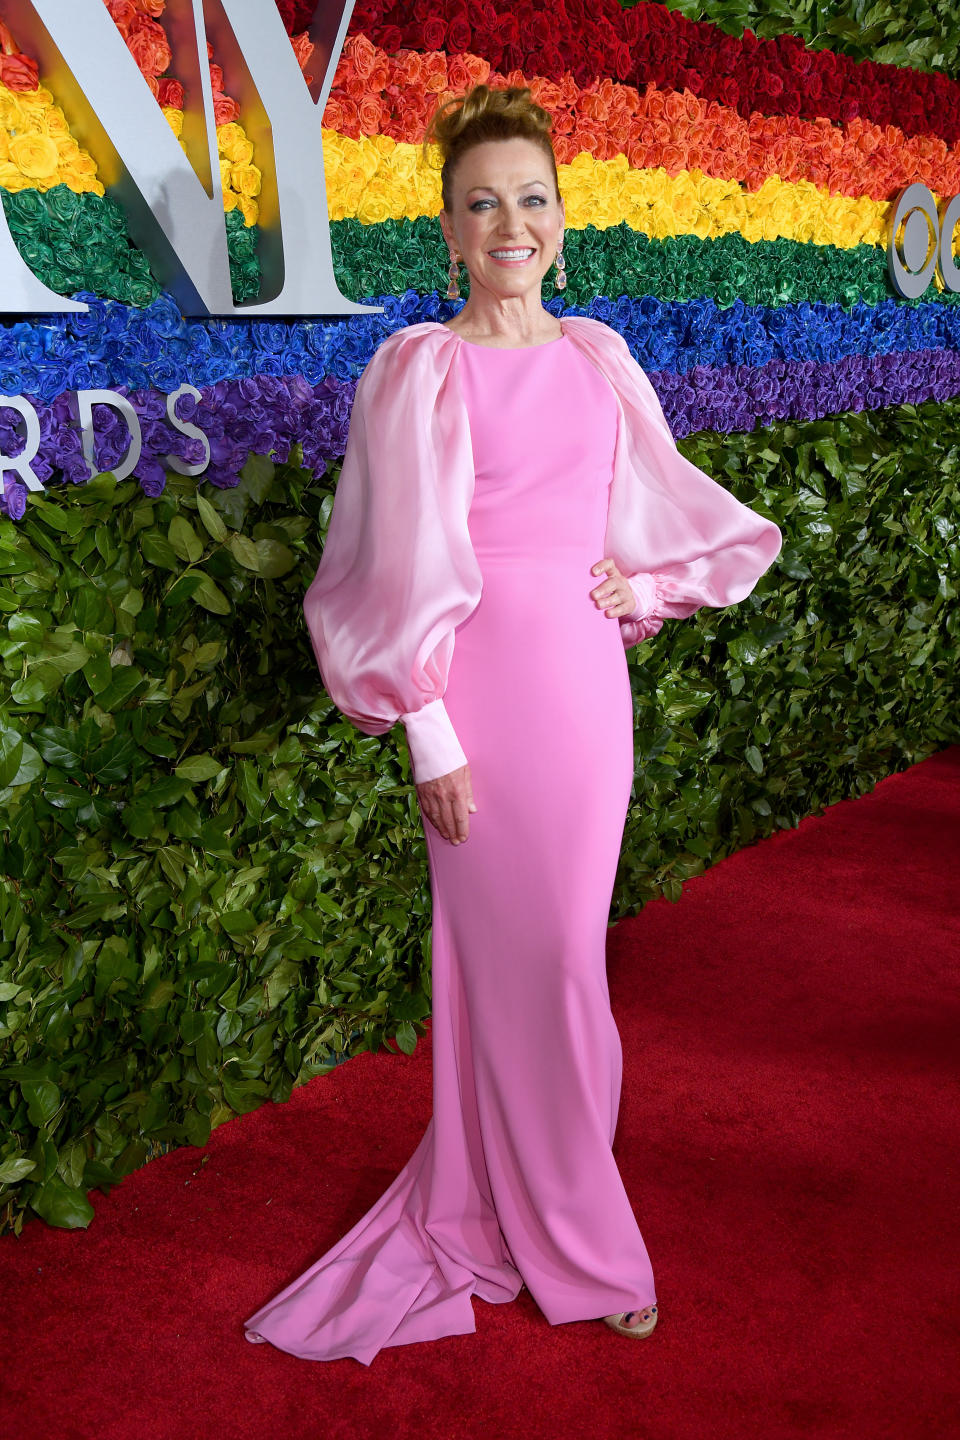 NEW YORK, NEW YORK - JUNE 09: Julie White attends the 73rd Annual Tony Awards at Radio City Music Hall on June 09, 2019 in New York City. (Photo by Kevin Mazur/Getty Images for Tony Awards Productions)